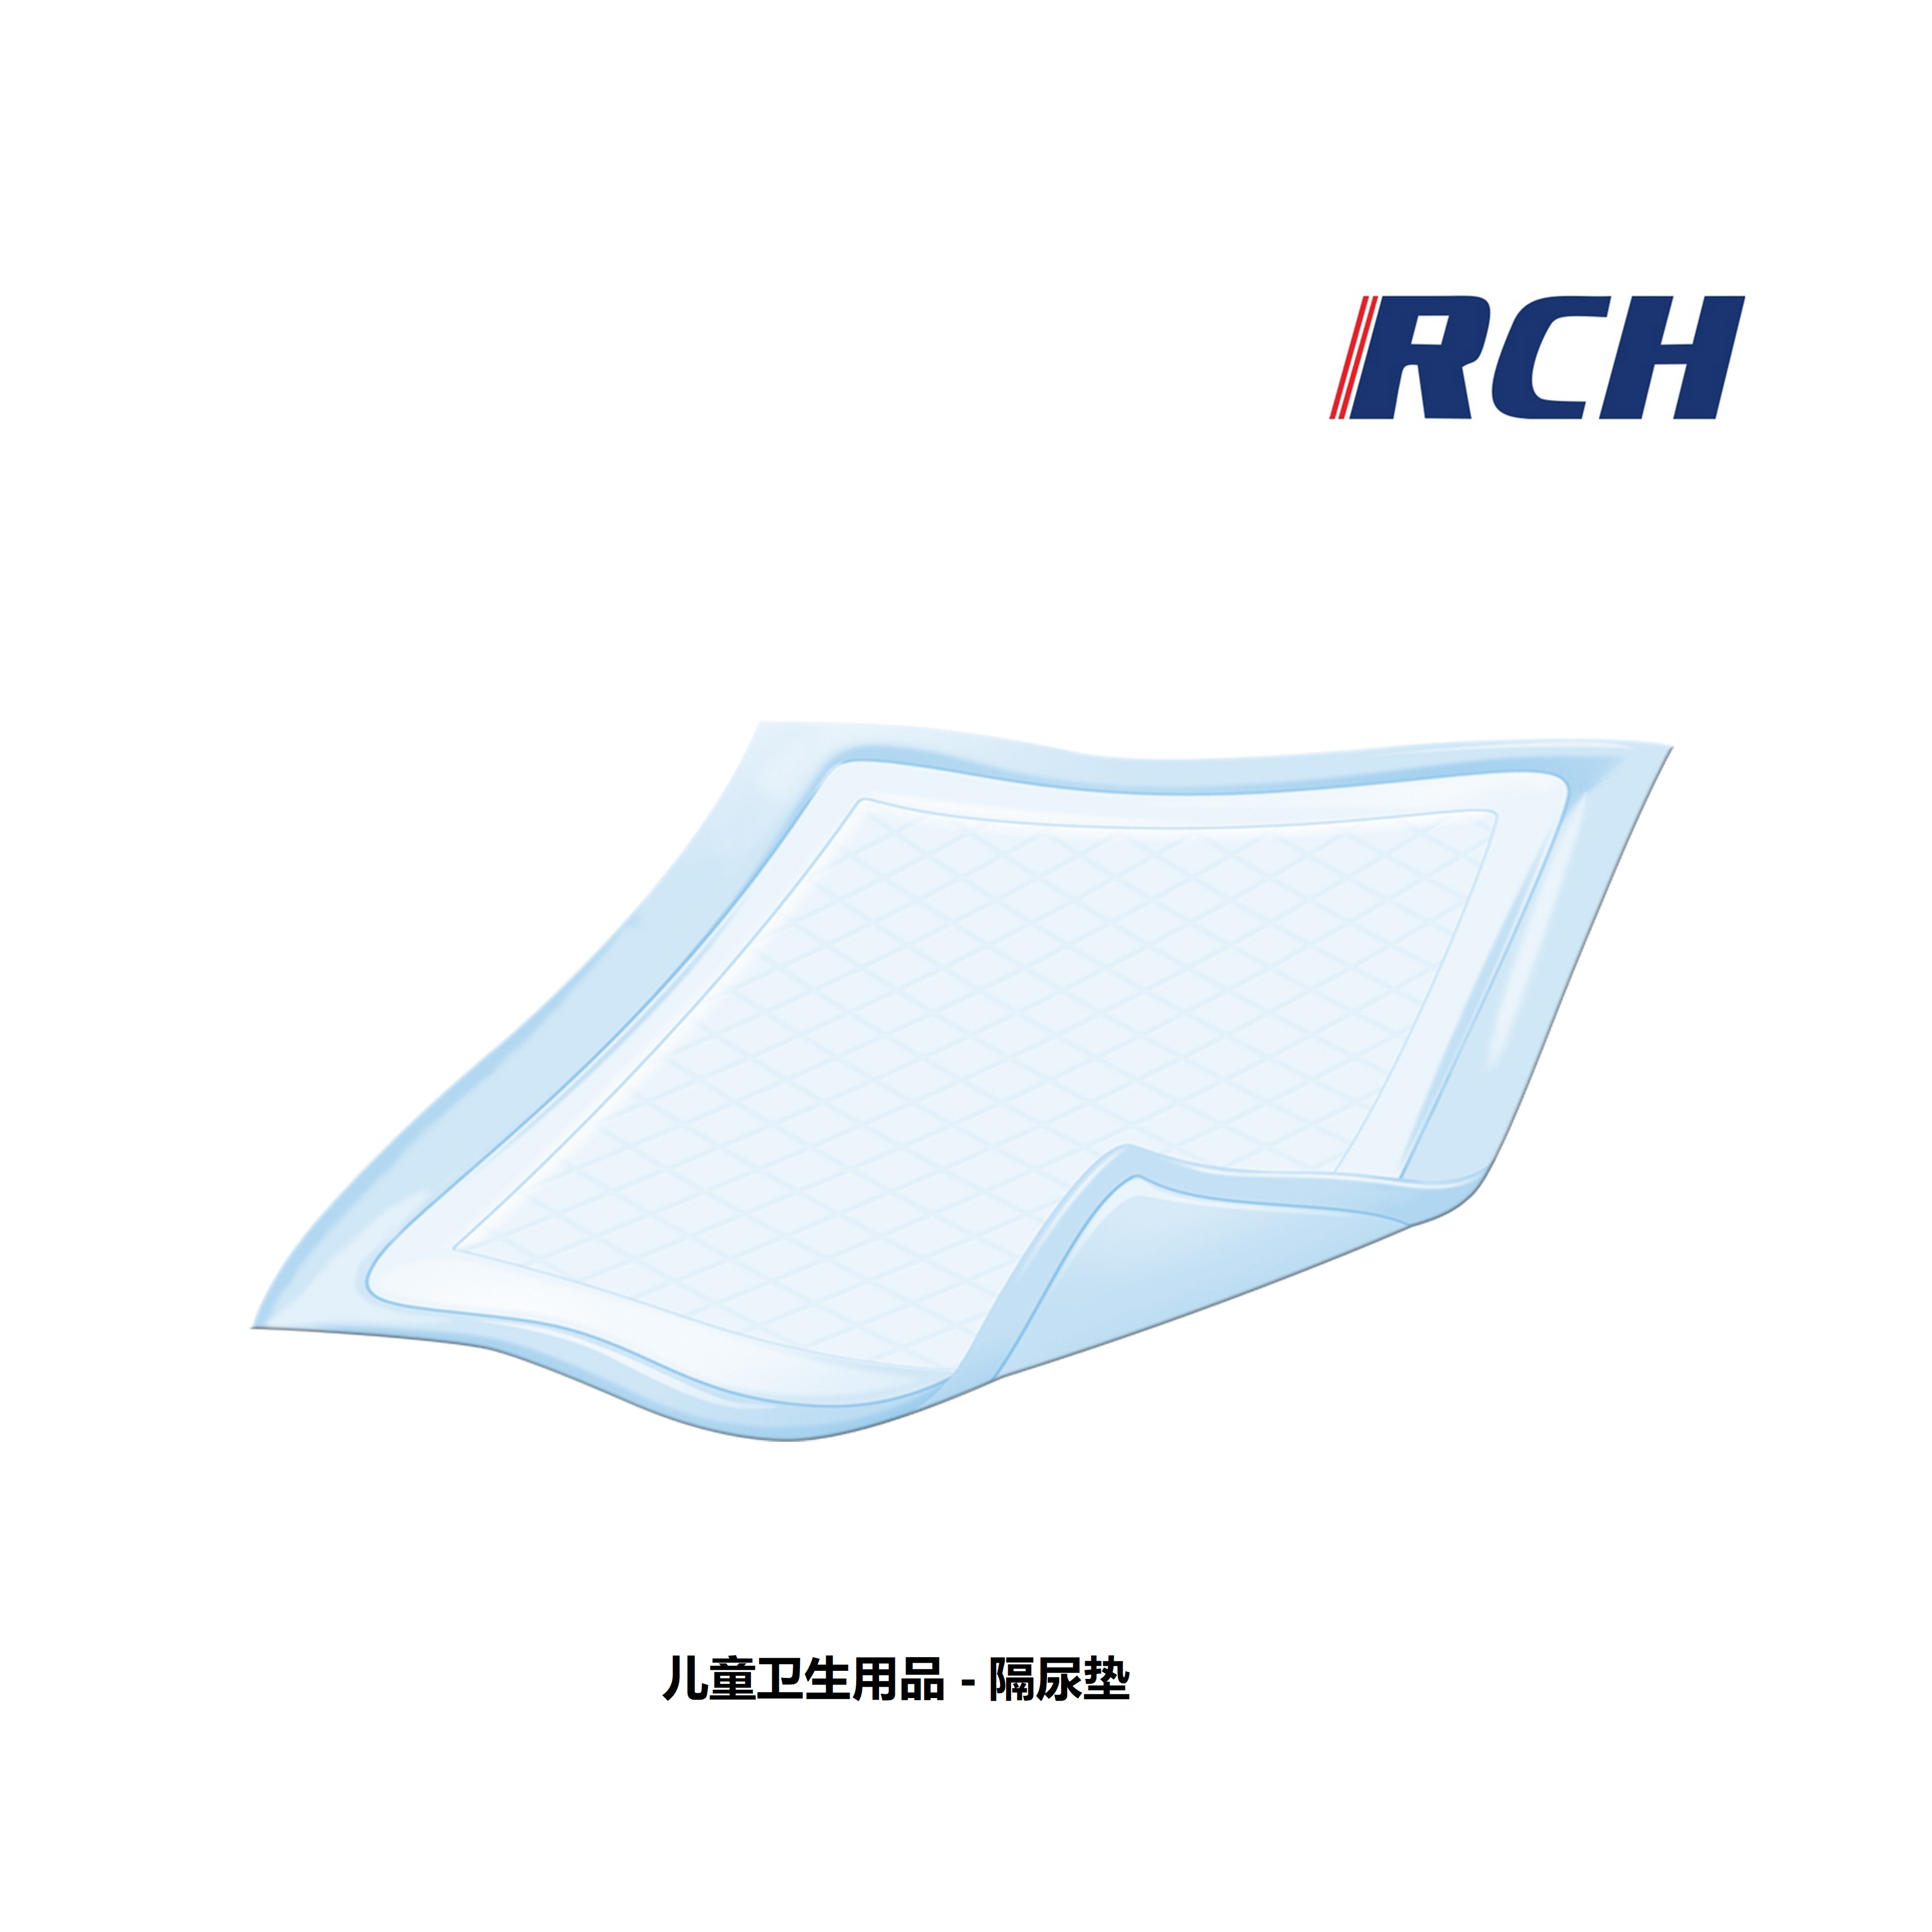 Full Servo Disposable Changing Pad Machinery Supplier